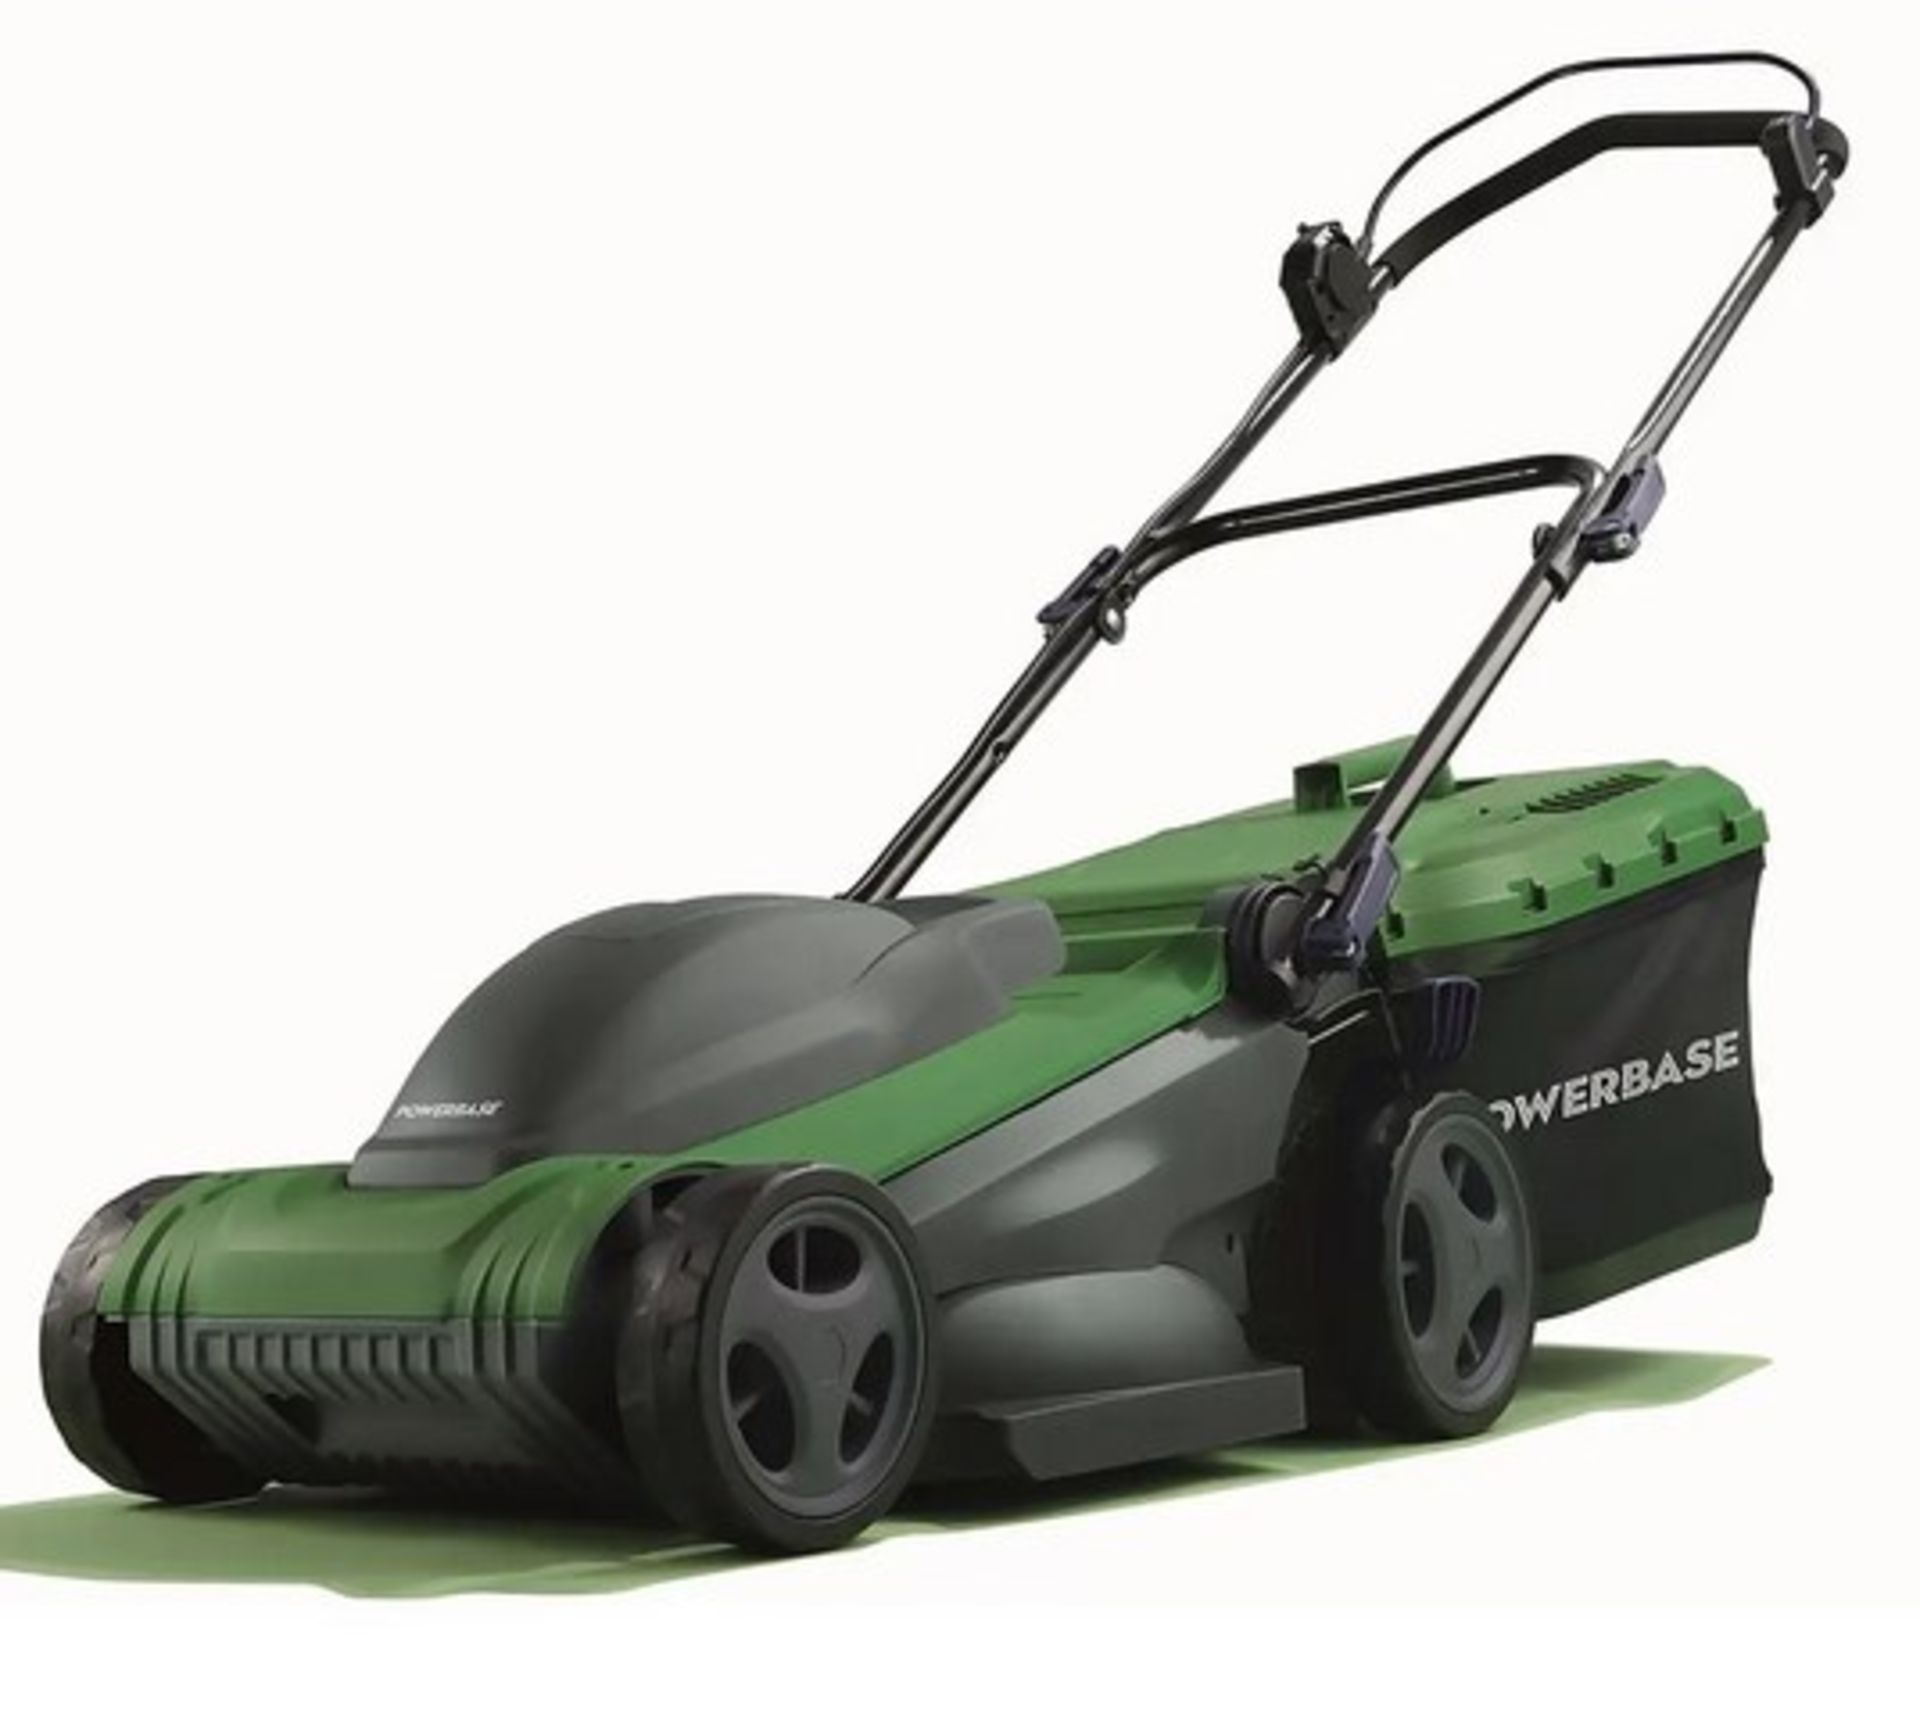 (115/Mez/1G) Lot RRP £791 When Complete. 6x Lawnmowers. 1x Bosch Rotak 37-14 Ergo Rotary RRP £139... - Image 5 of 11